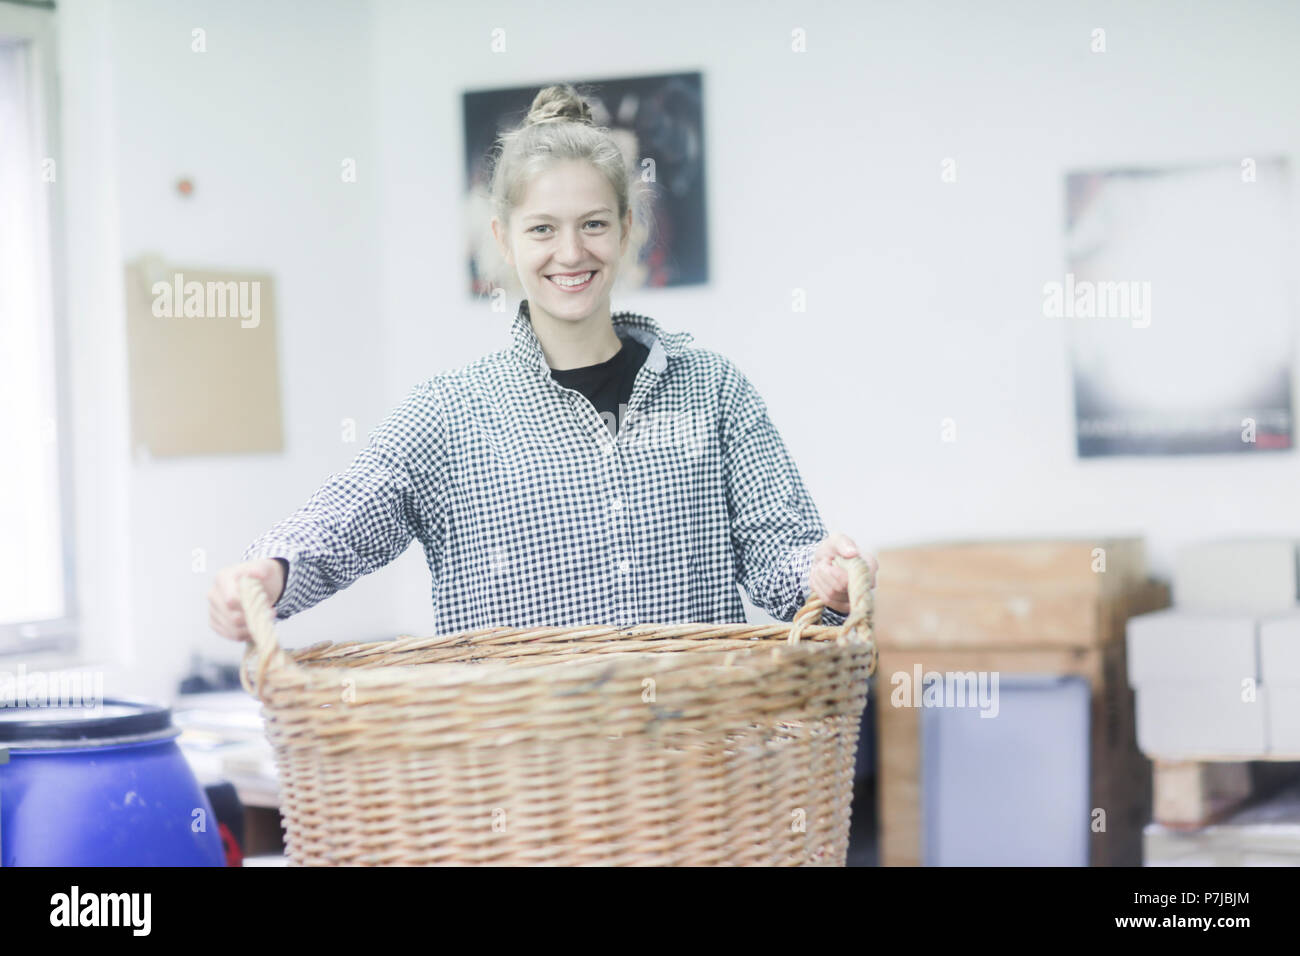 Woman standing in a workshop carrying a basket Stock Photo